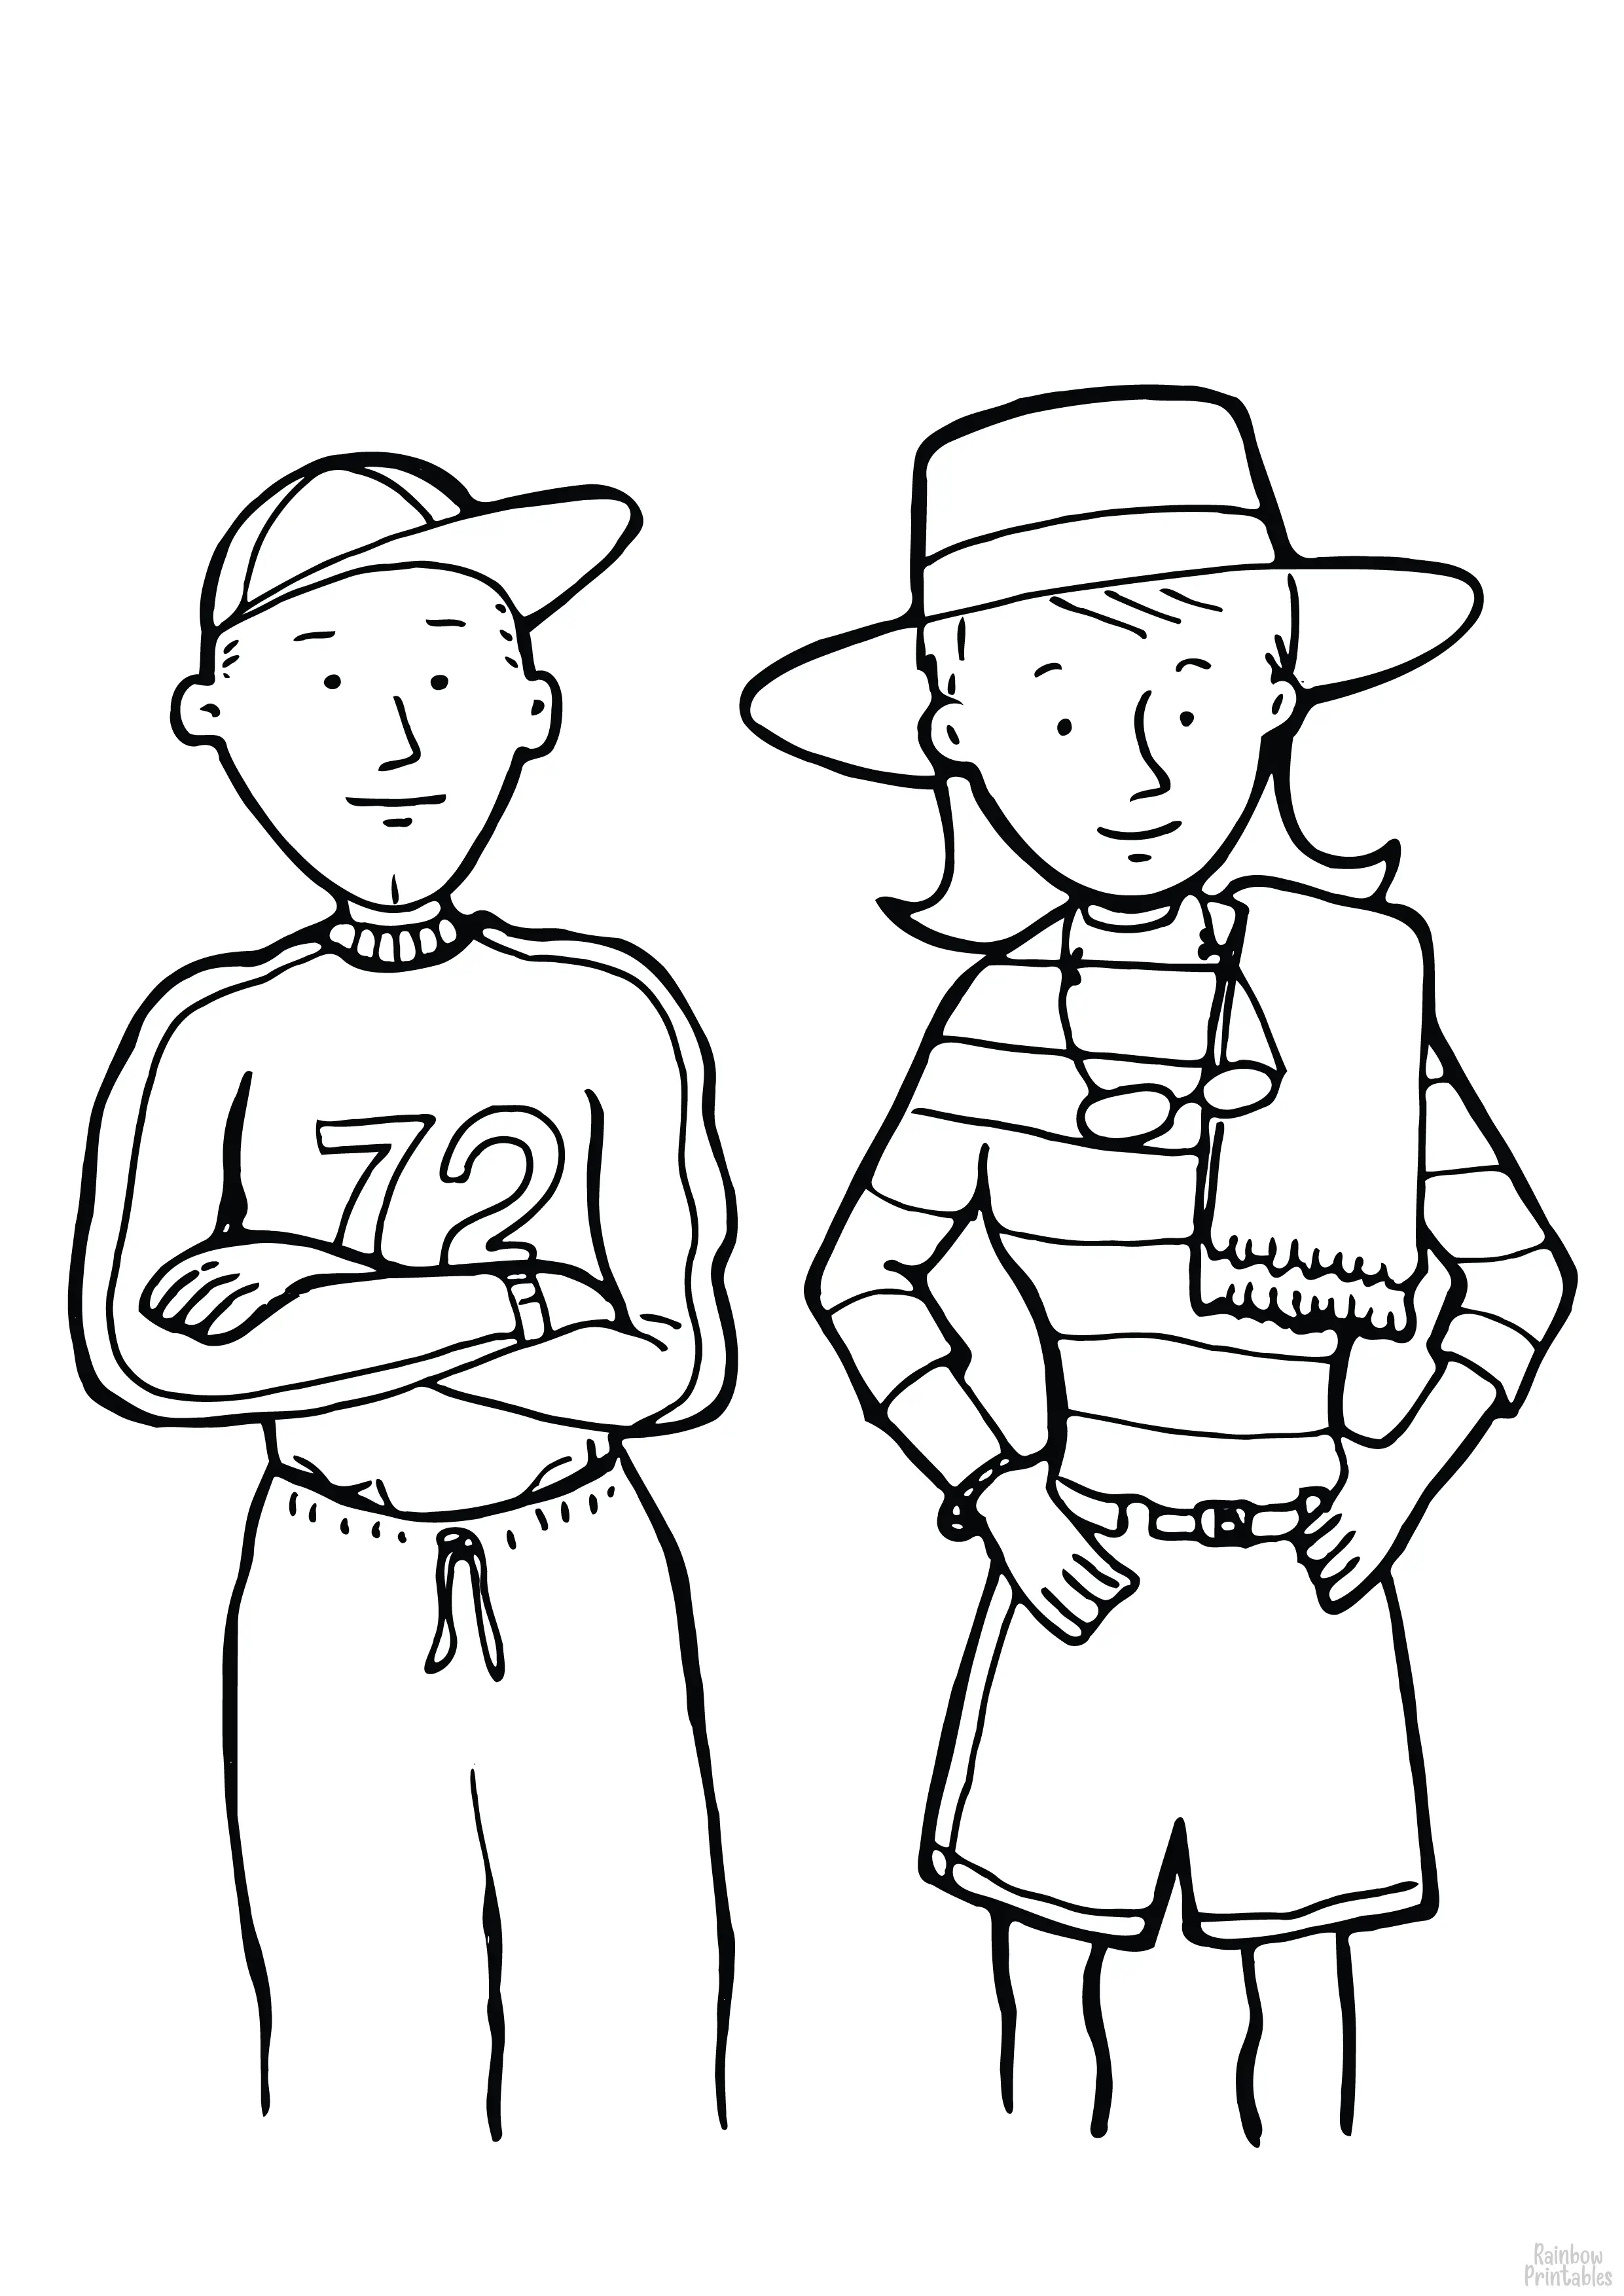 PEOPLE BASEBALL GARDENER Free Clipart Coloring Pages for Kids Adults Art Activities Line Art